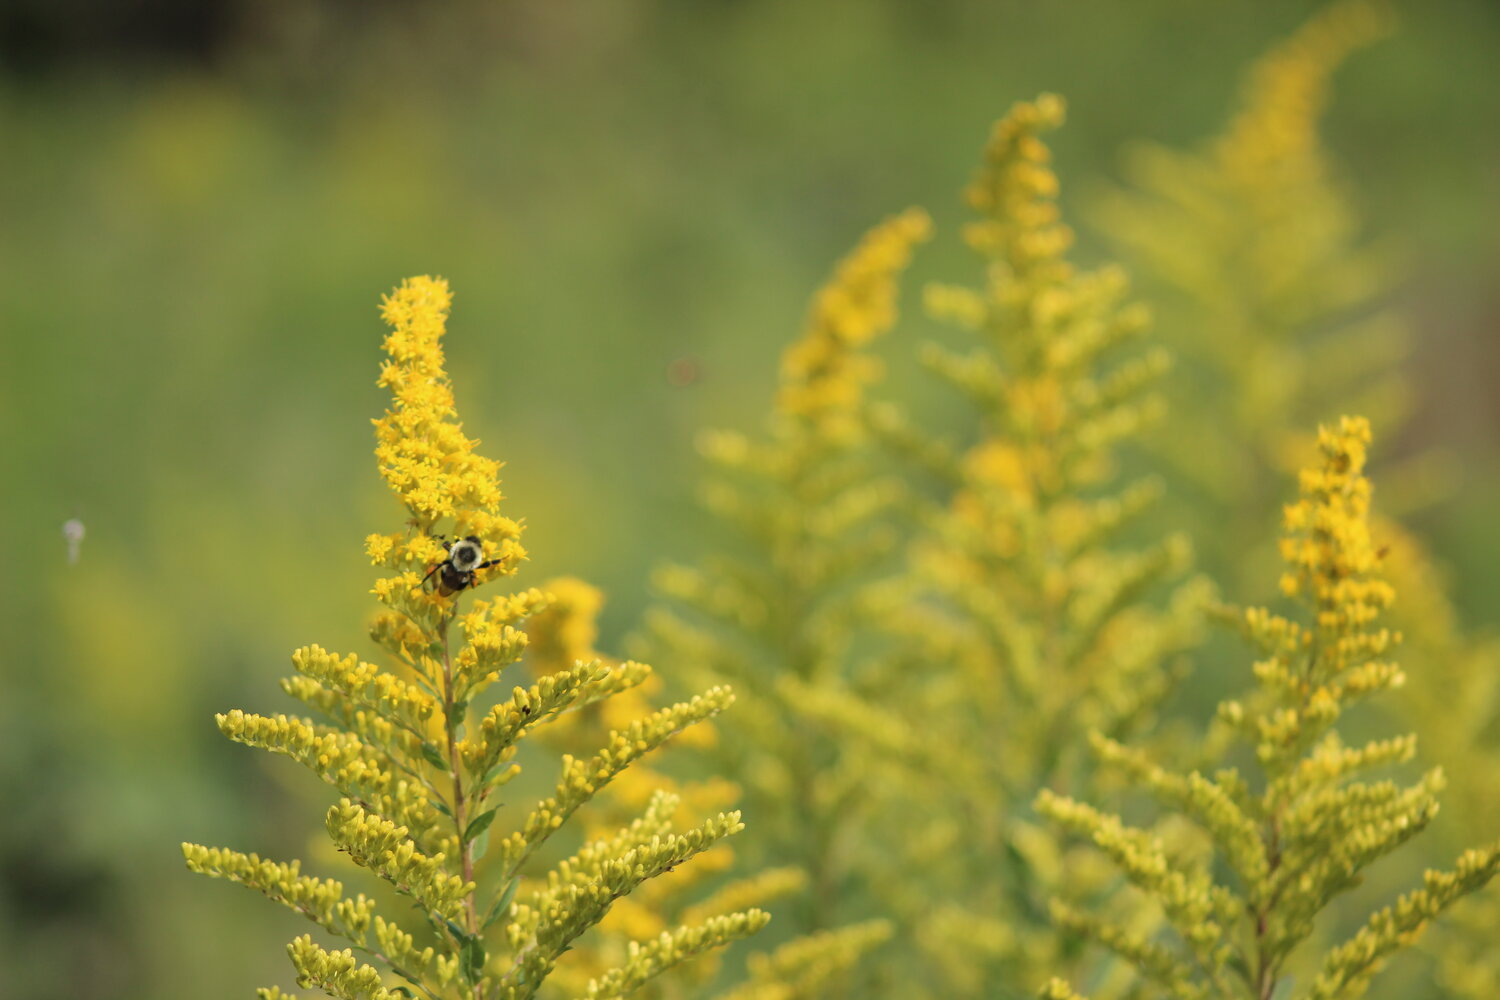 Several species of goldenrod are bursting with color this time of year at Leedsmoor, Norwood Farm and Beechwood Farm in the middle moors.